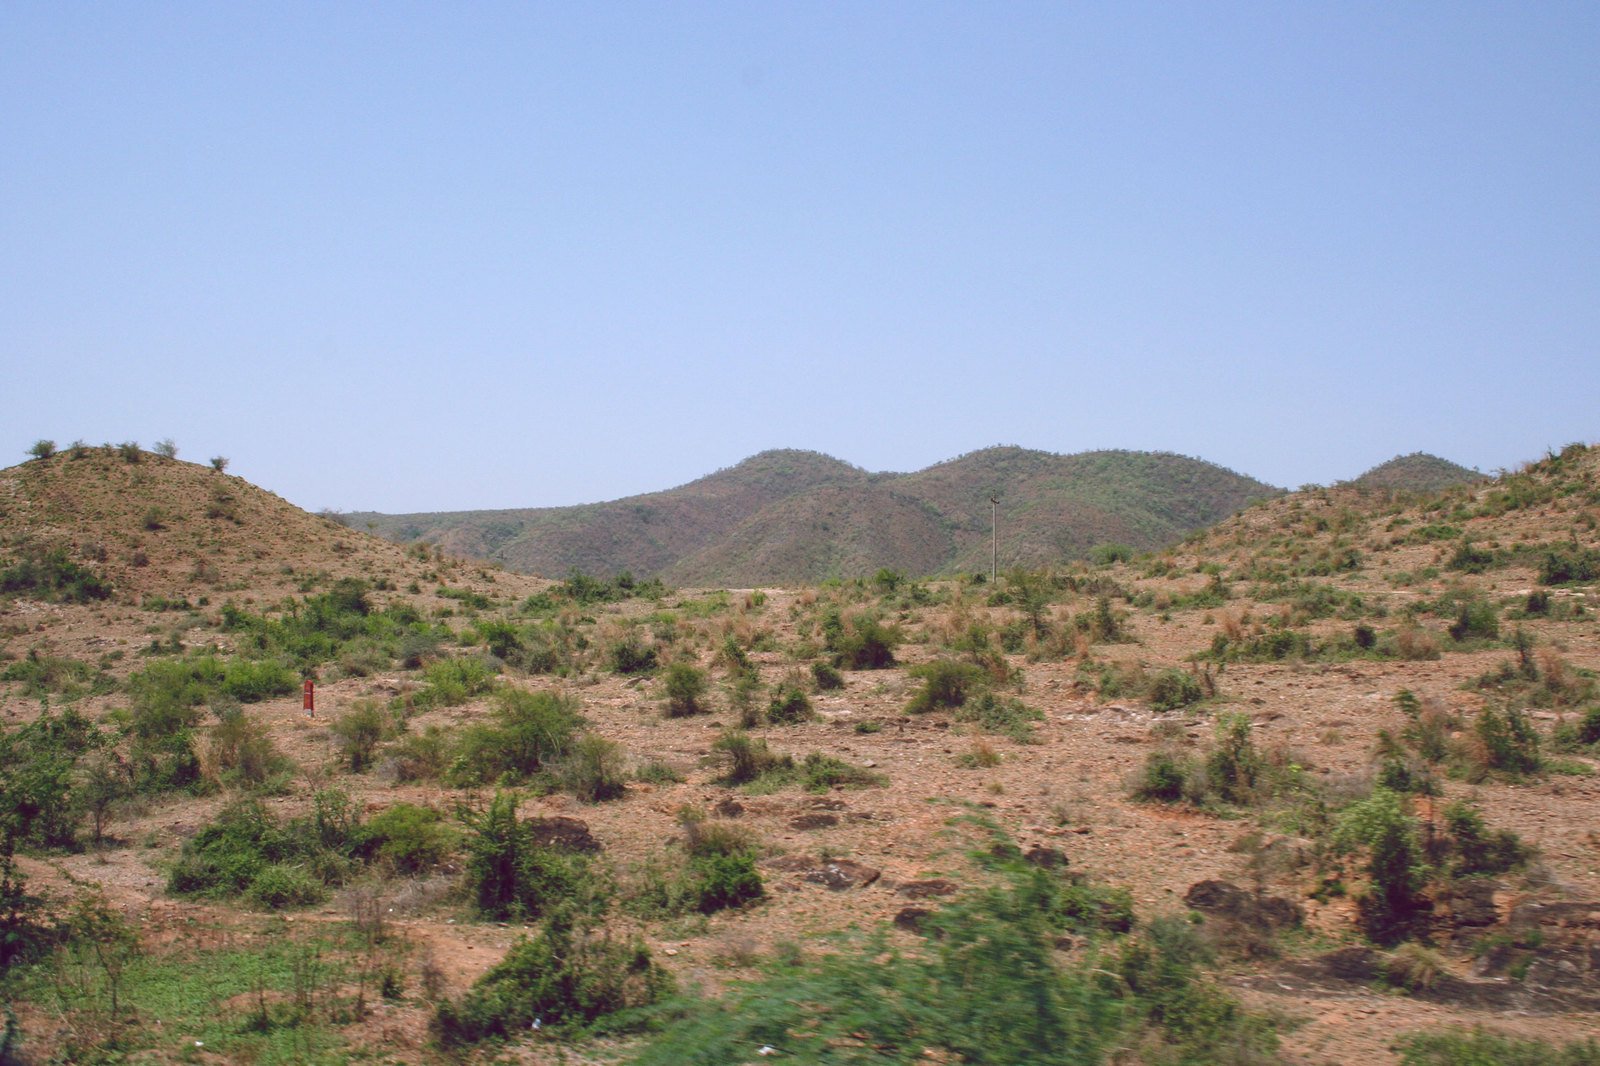 the barren desert area with two mountain ranges in the distance